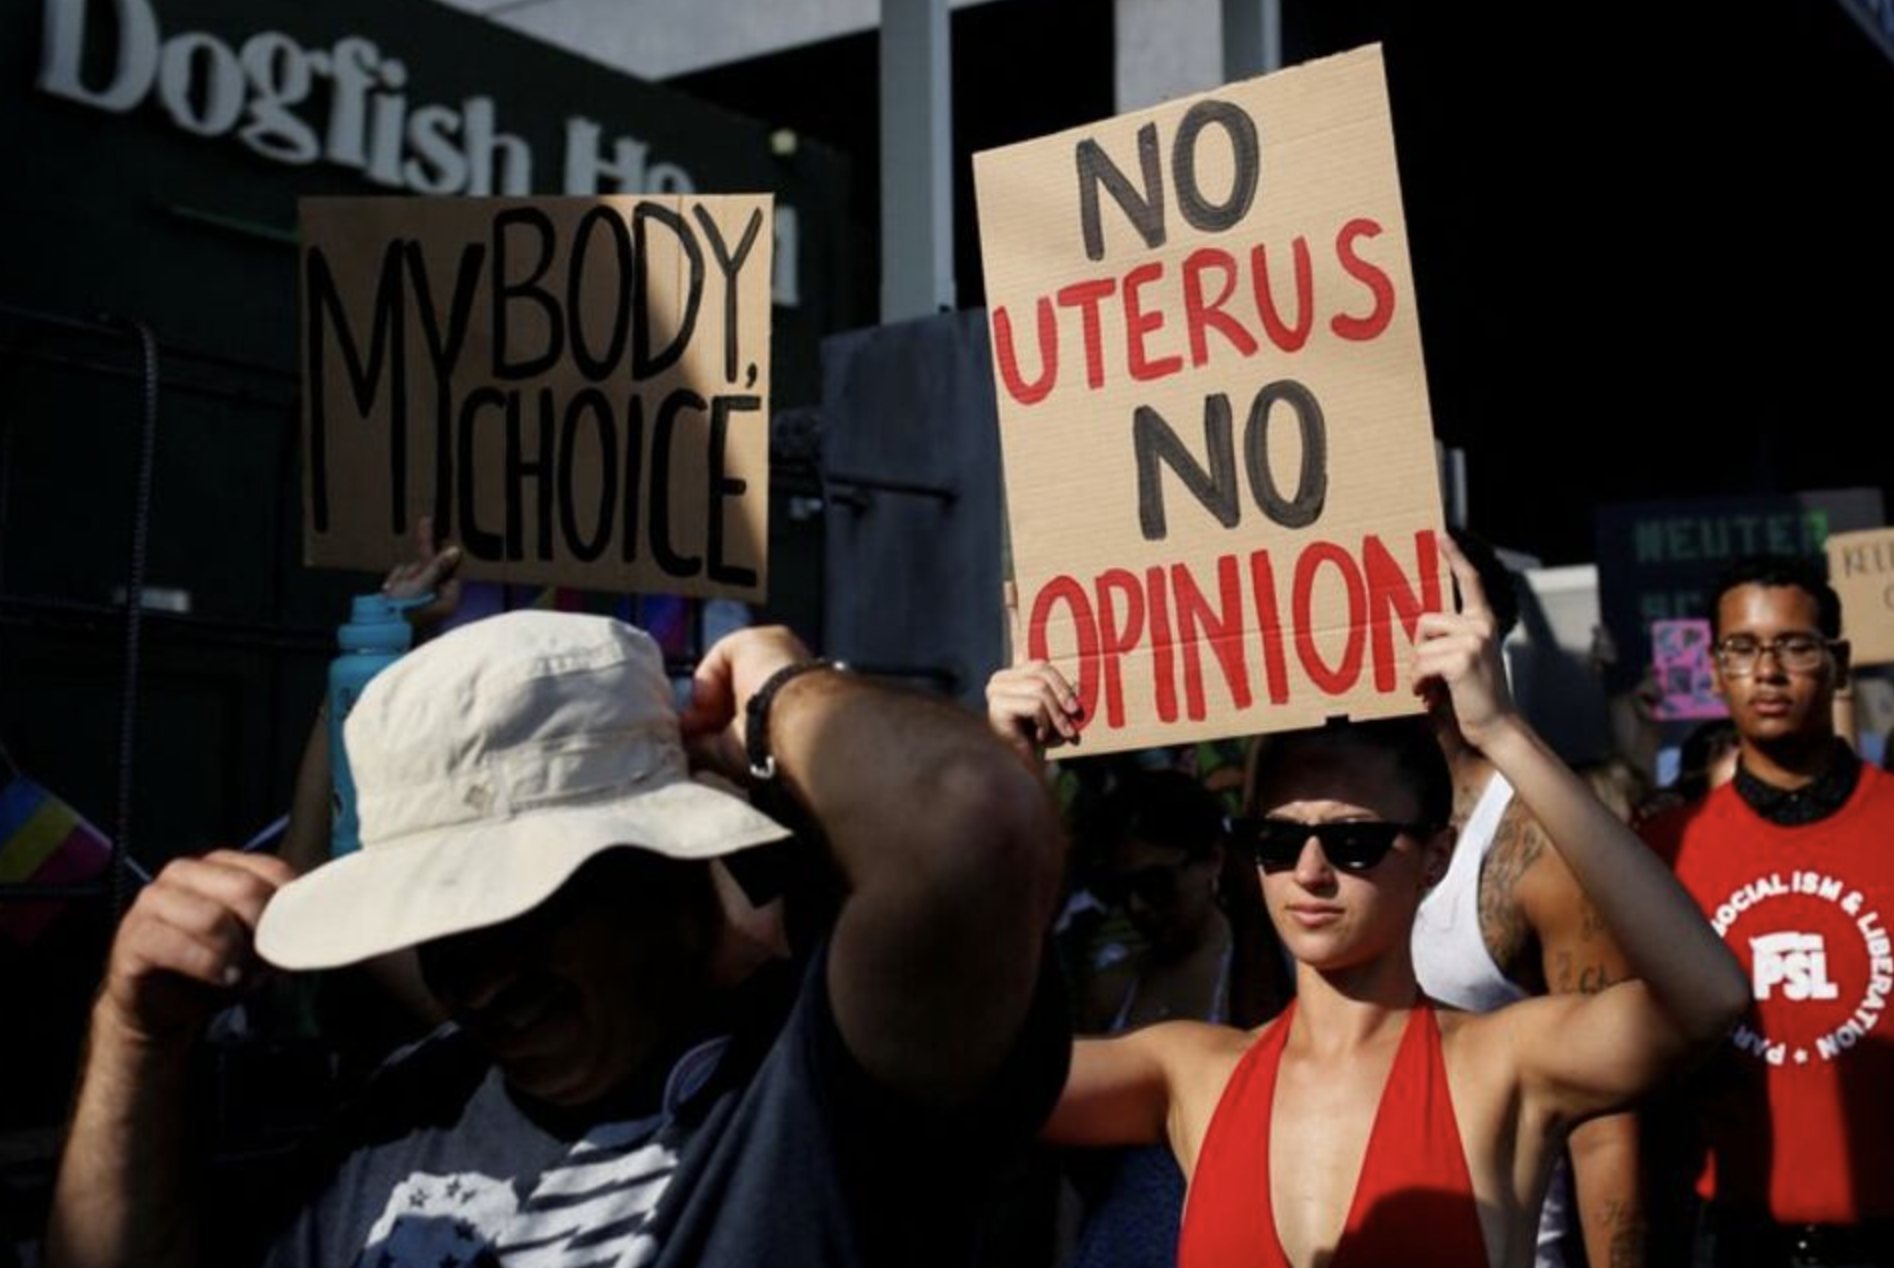 #VoteOnAbortionFL: Florida’s Near-Total Abortion Ban Heads to November Ballot After Supreme Court Approval.